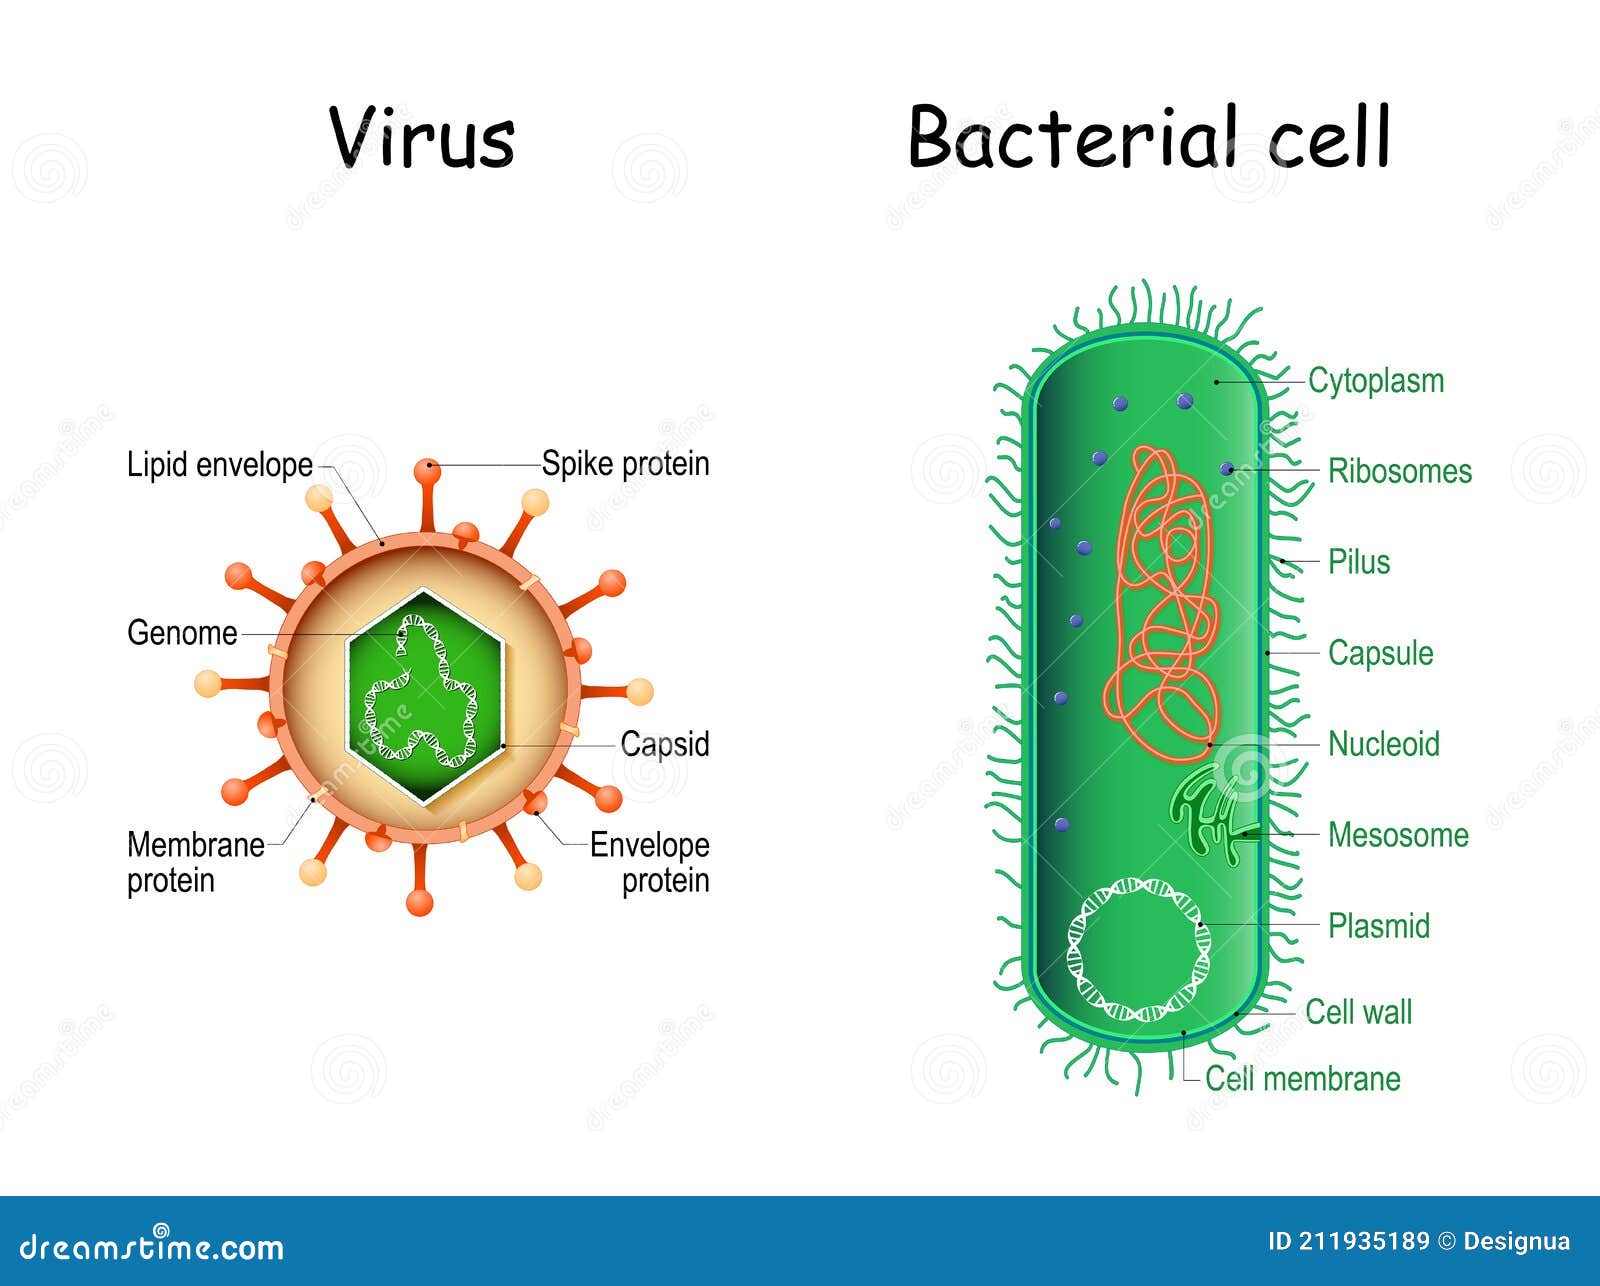 virus and bacteria. bacterial cell anatomy and virion structure